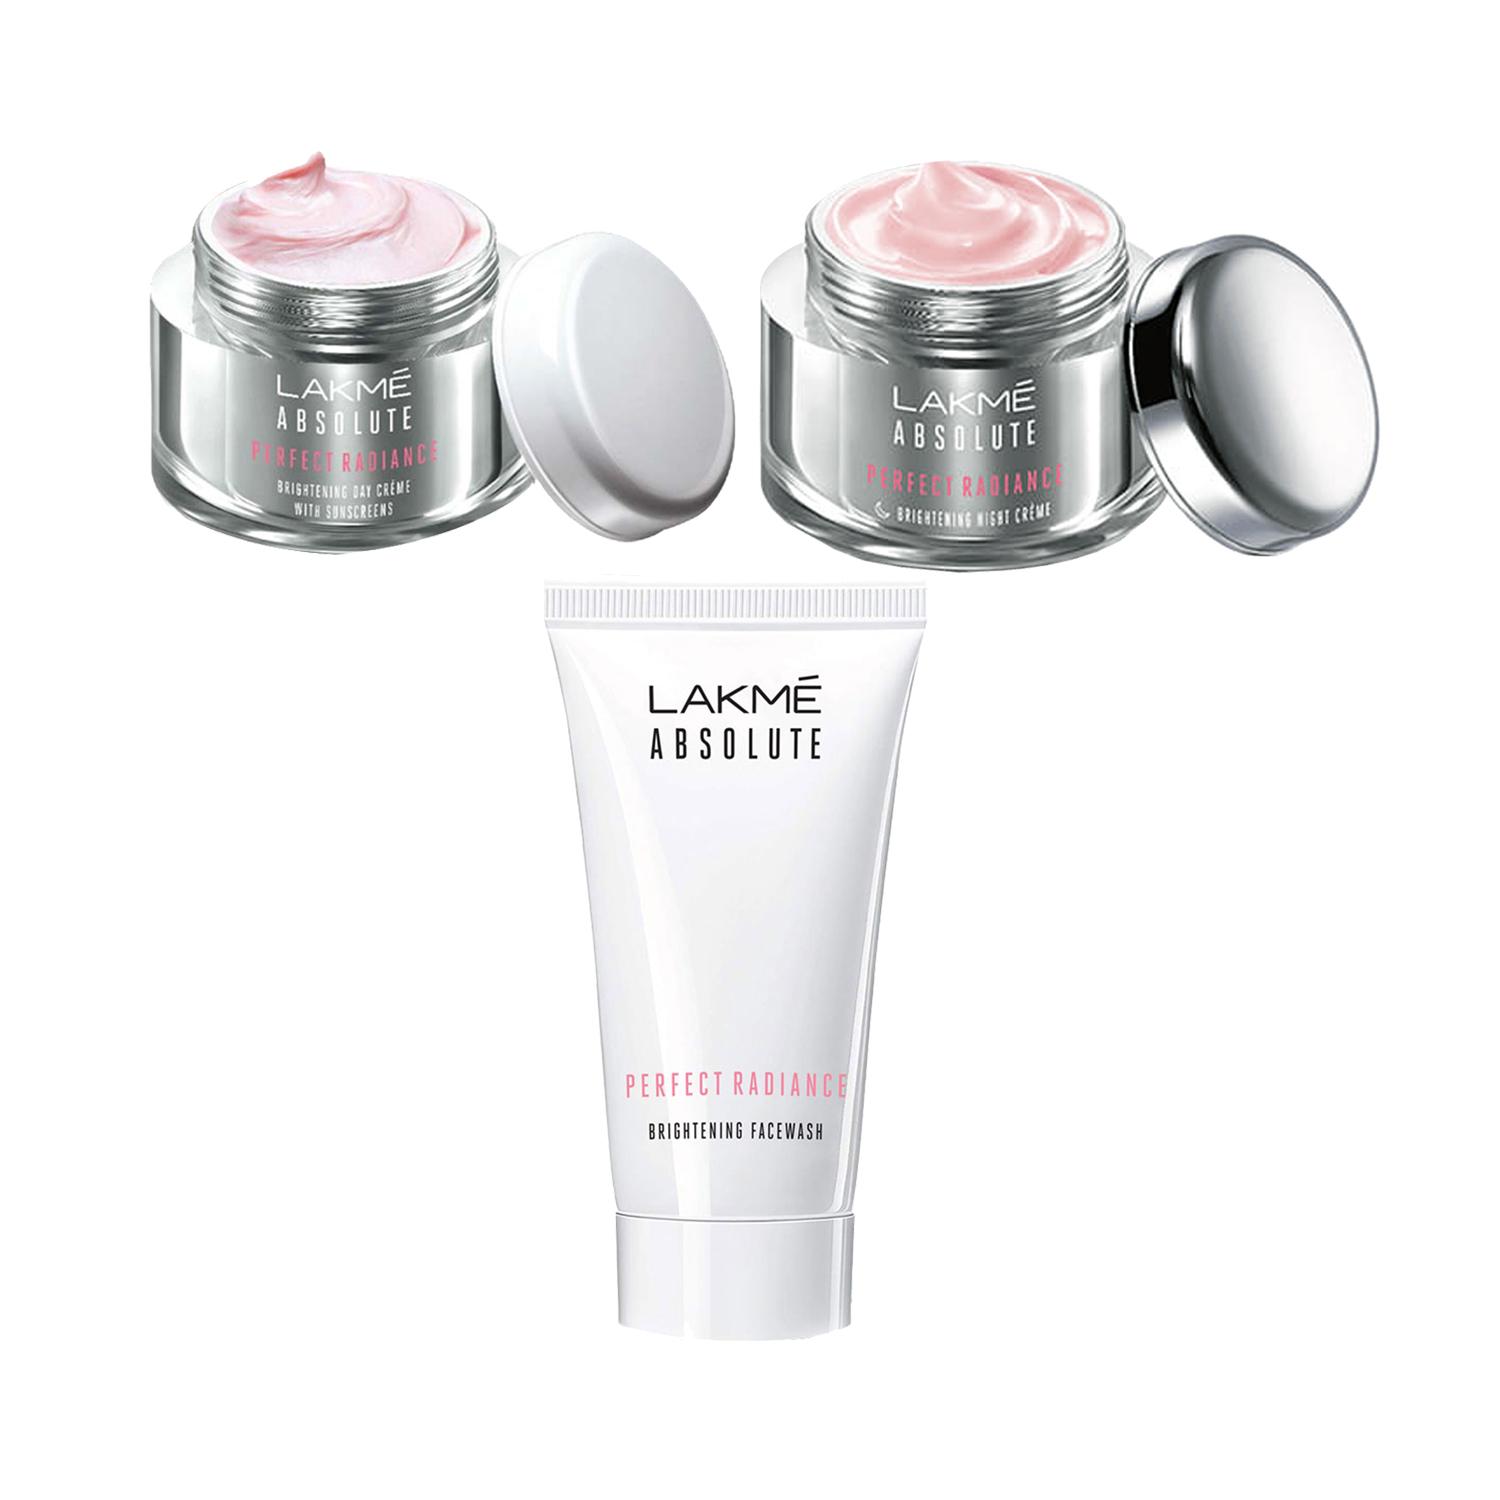 Lakme | Lakme Absolute Perfect Radiance Skin Brightening Regime Combo